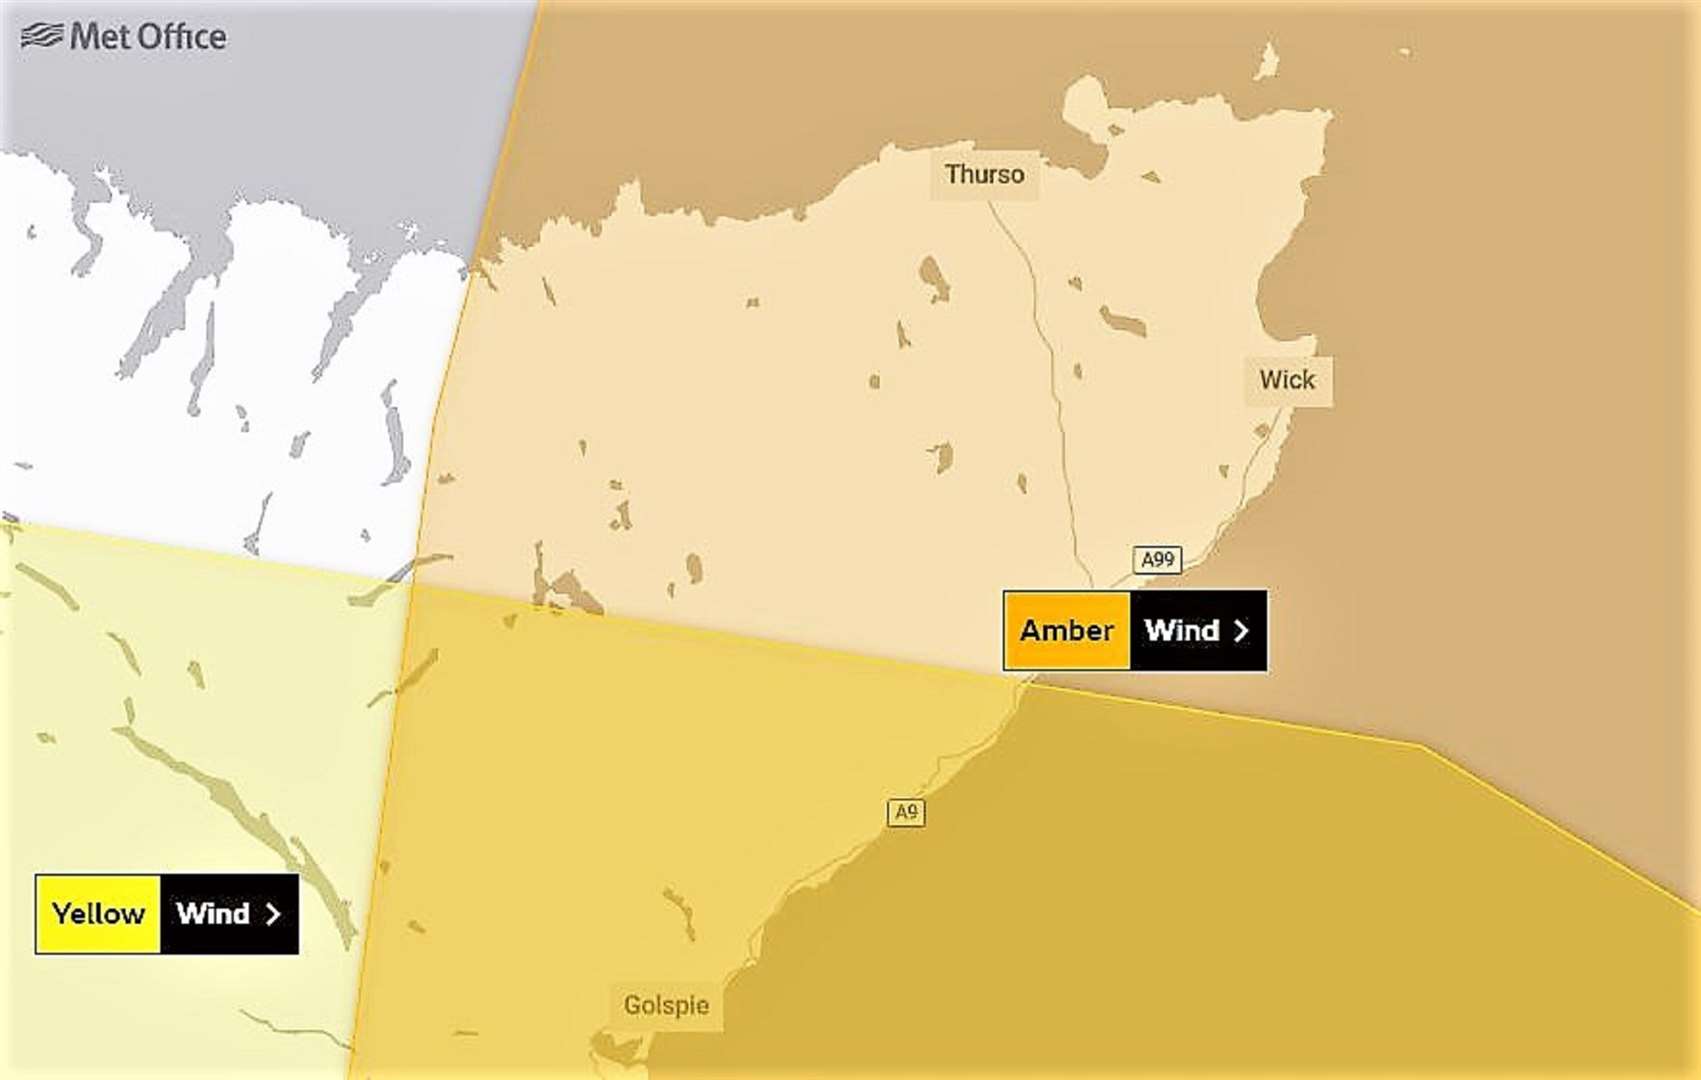 Saturday's Amber warning from the Met Office.